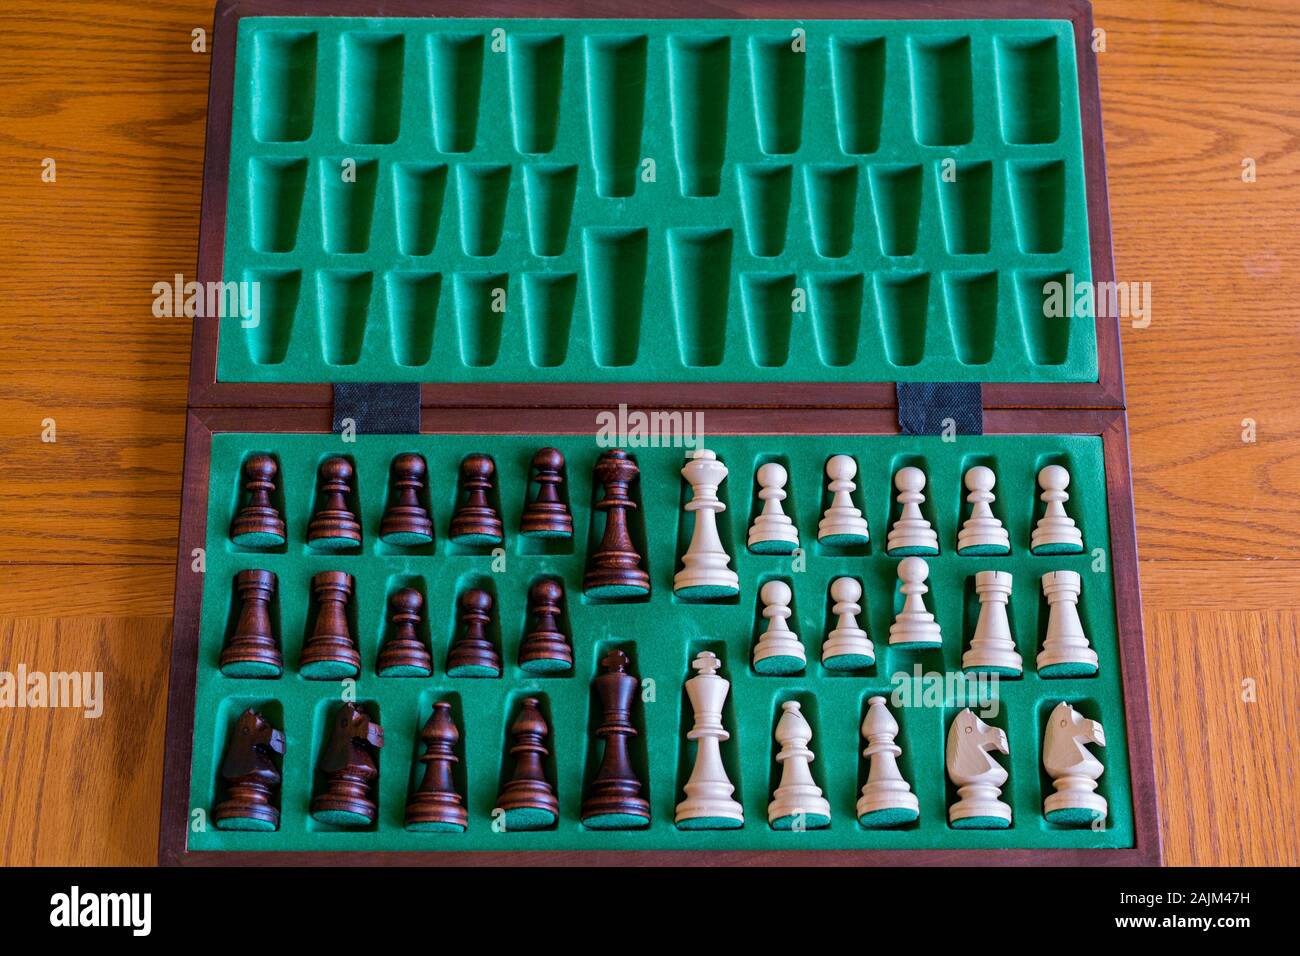 A wooden chess set in its box, view from above with brown background. The picture shows old traditional hand-made chess in a box. Stock Photo